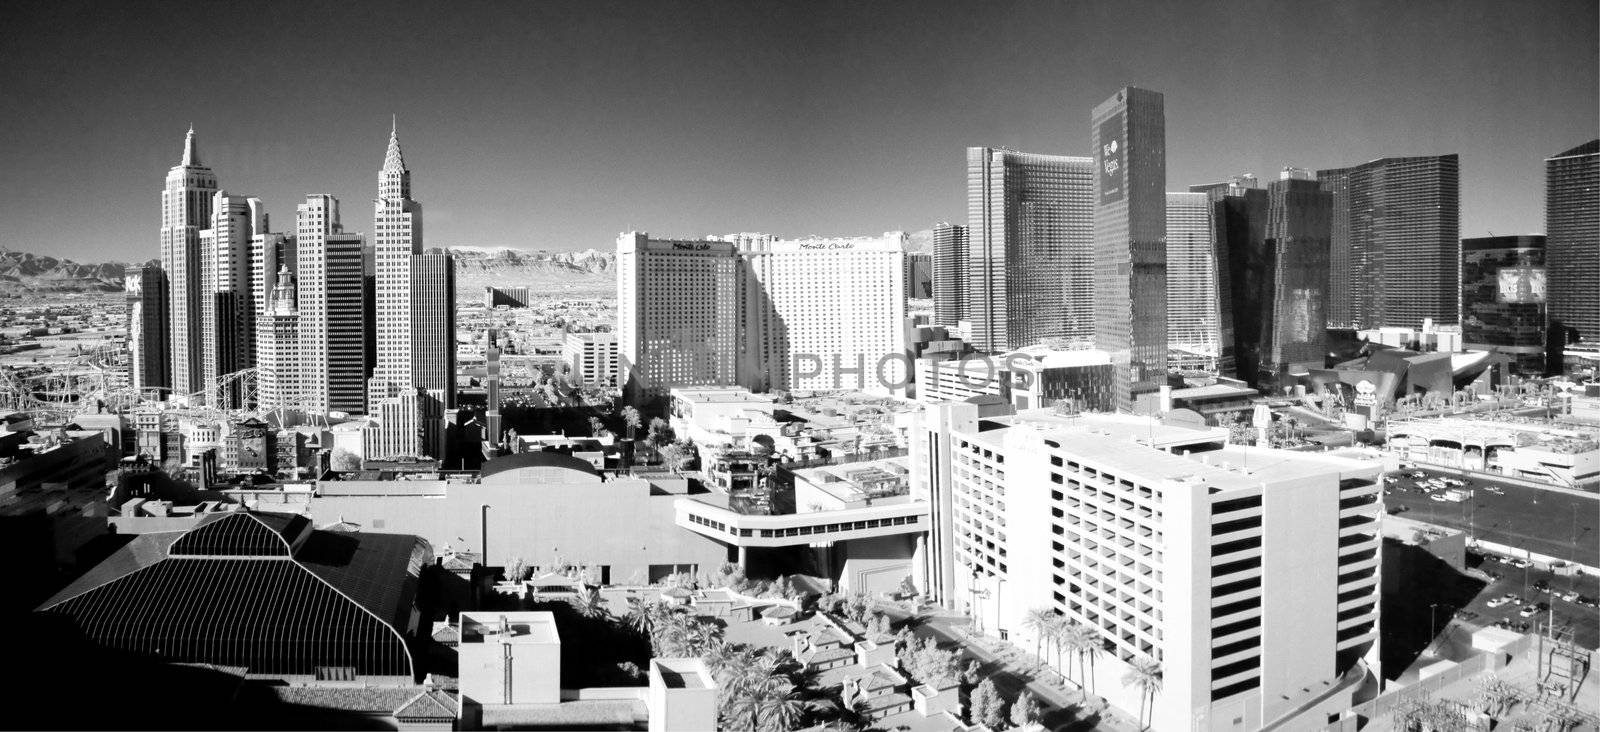 Panoramic infrared view of Las Vegas Strip skyline with the new city center on the right